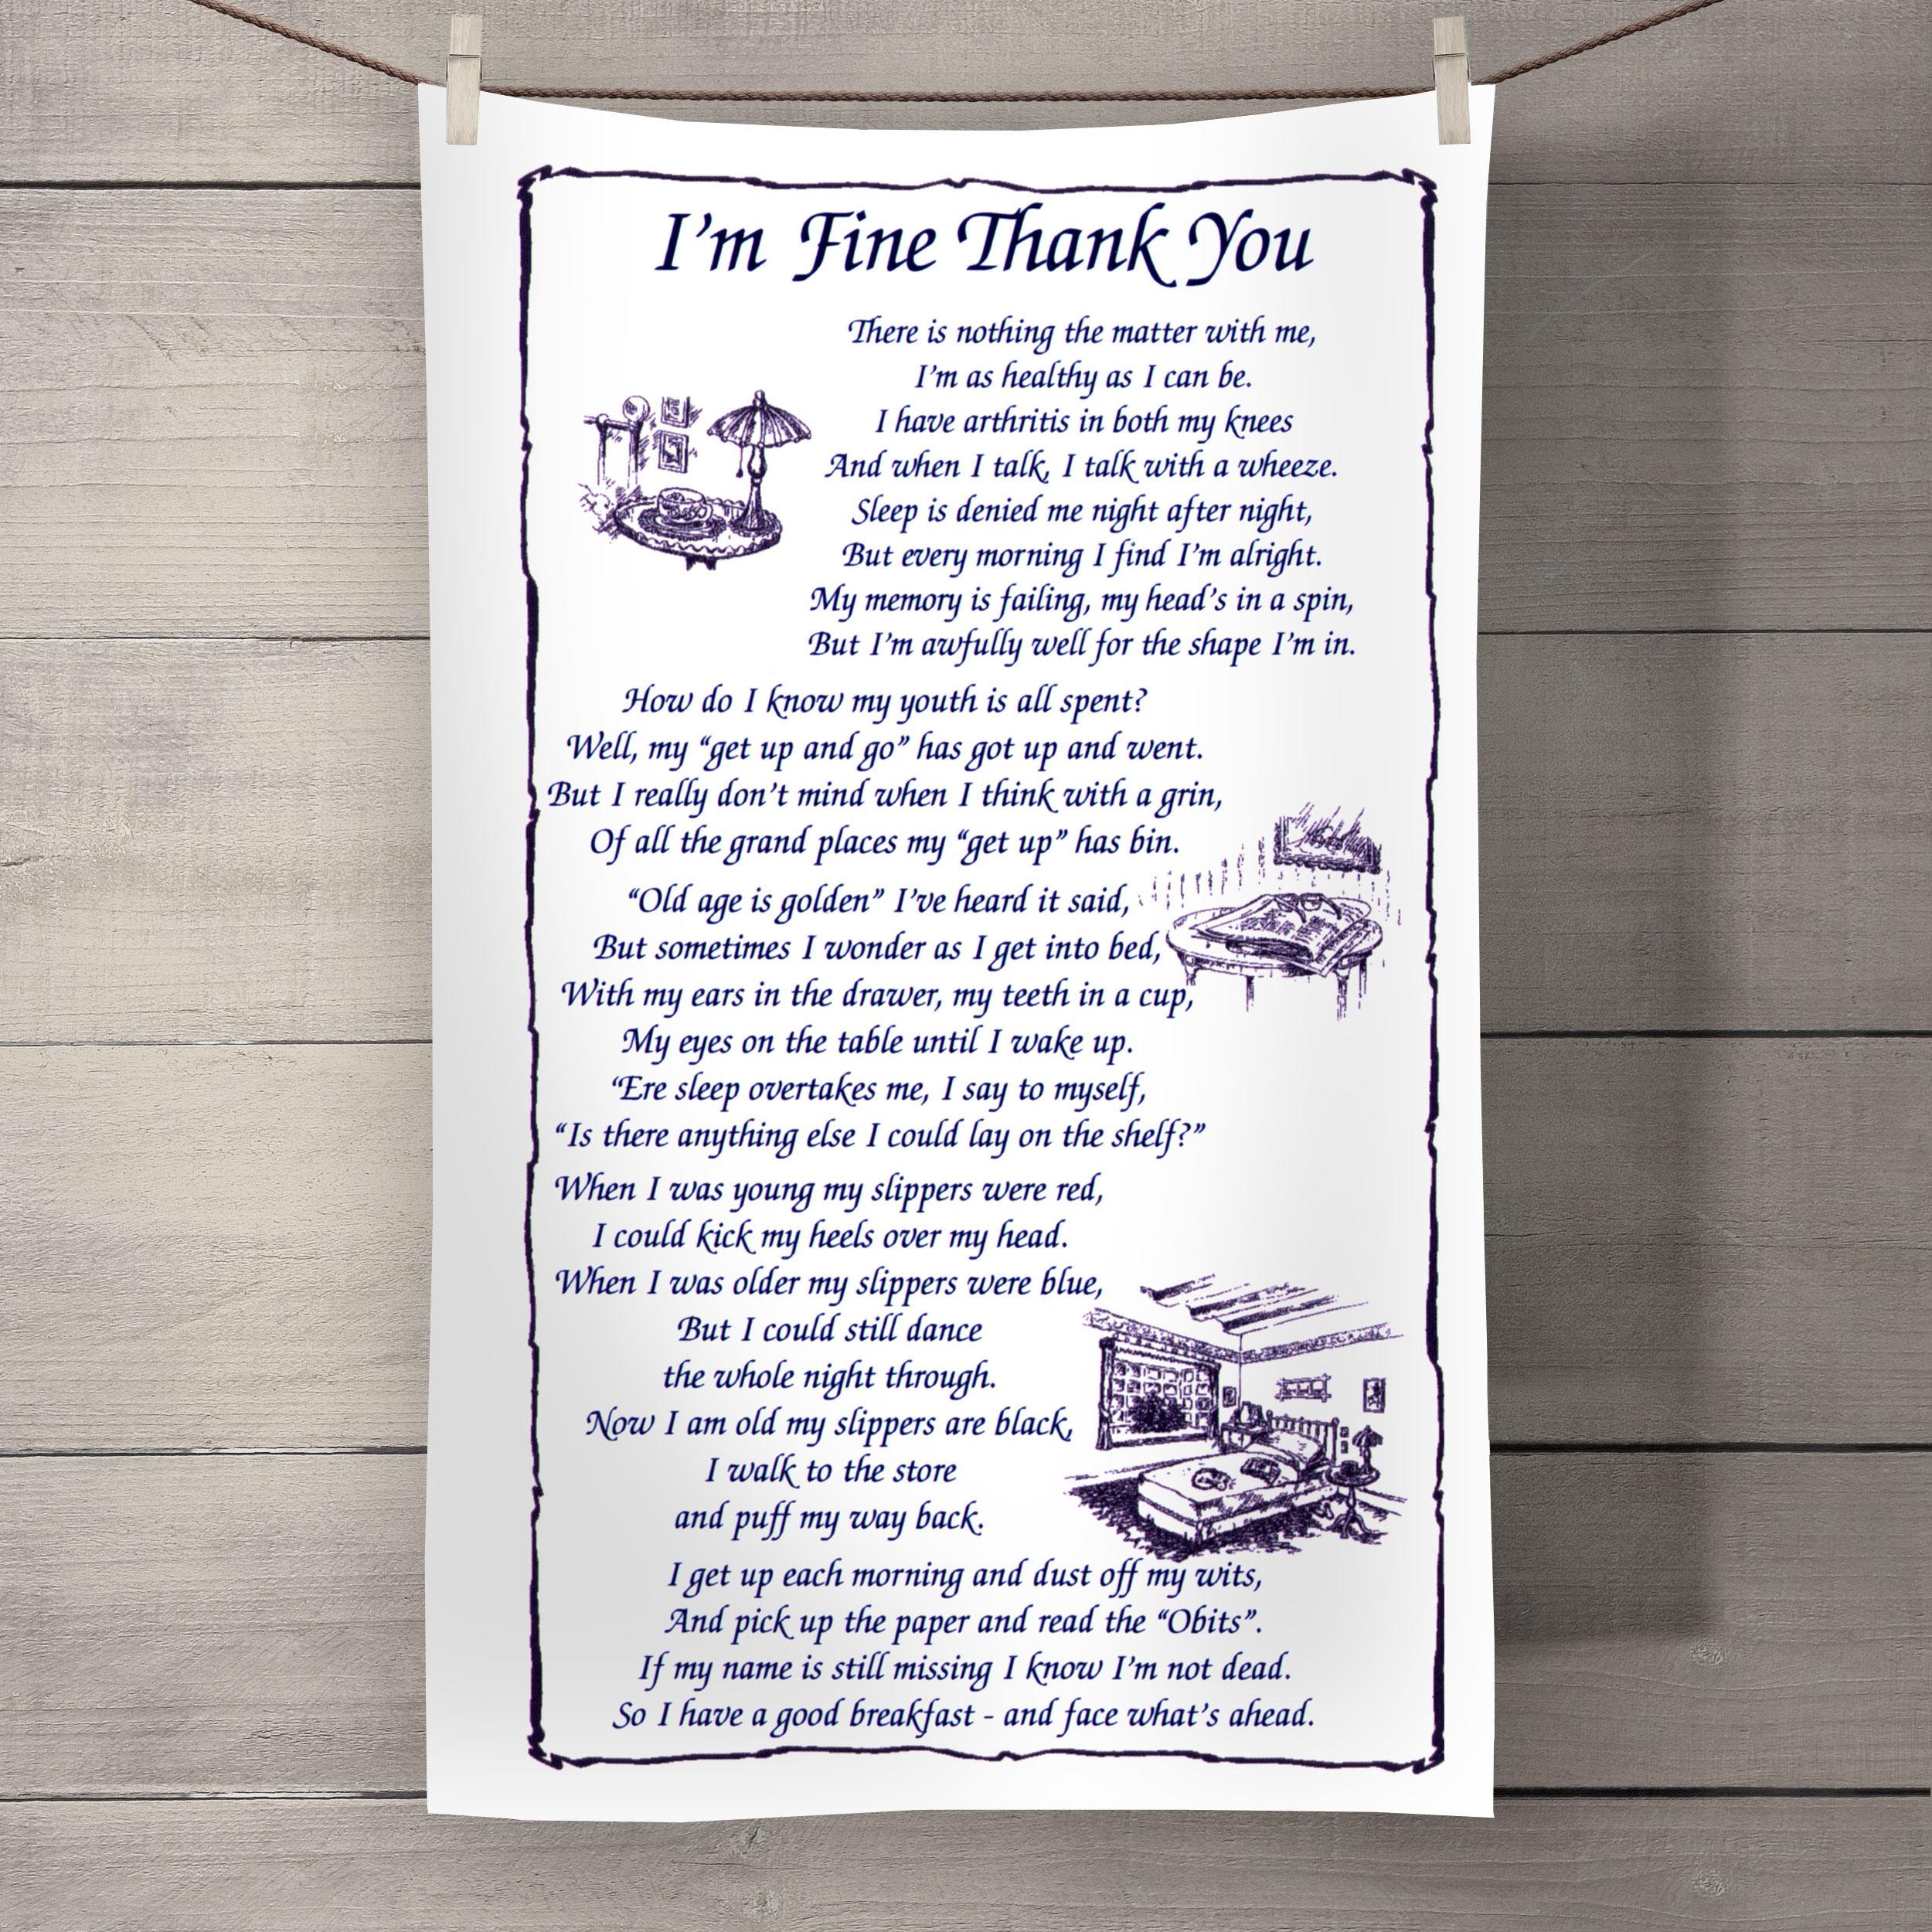 Ever been turned on by a tea towel? You might just be now thanks